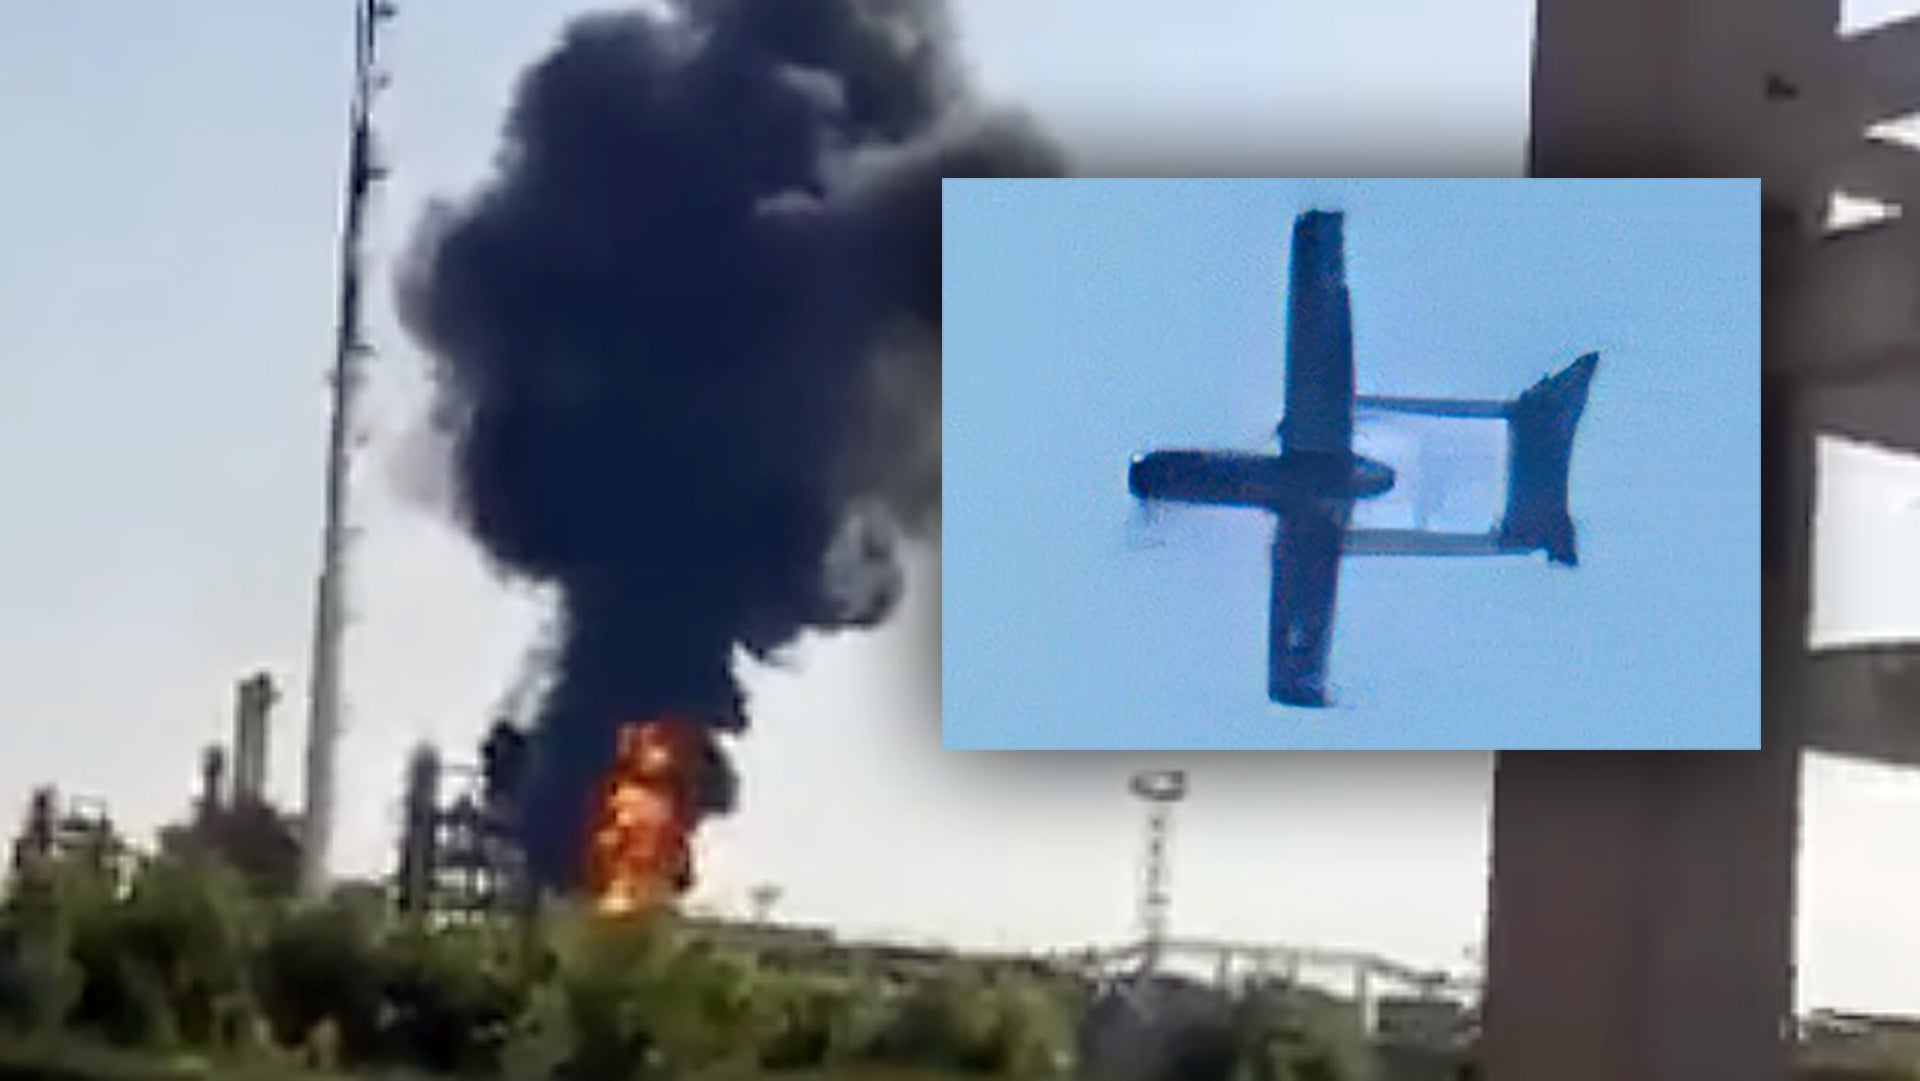 Video has emerged showing a twin-boom tail configured drone crashing into a Russian oil refinery in Novoshakhtinsk, in the Rostov region, on the borde